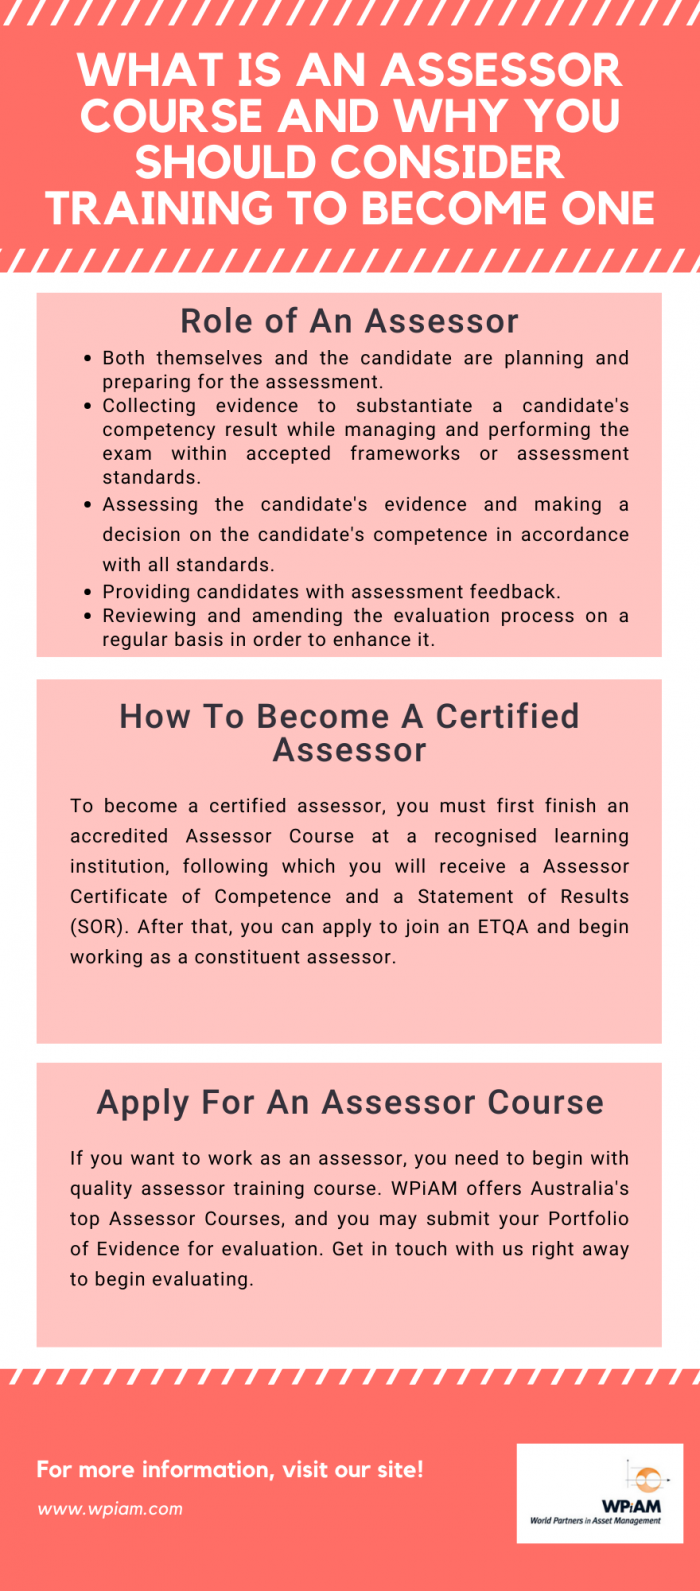 What Is An Assessor And Why You Should Consider Training To Become One